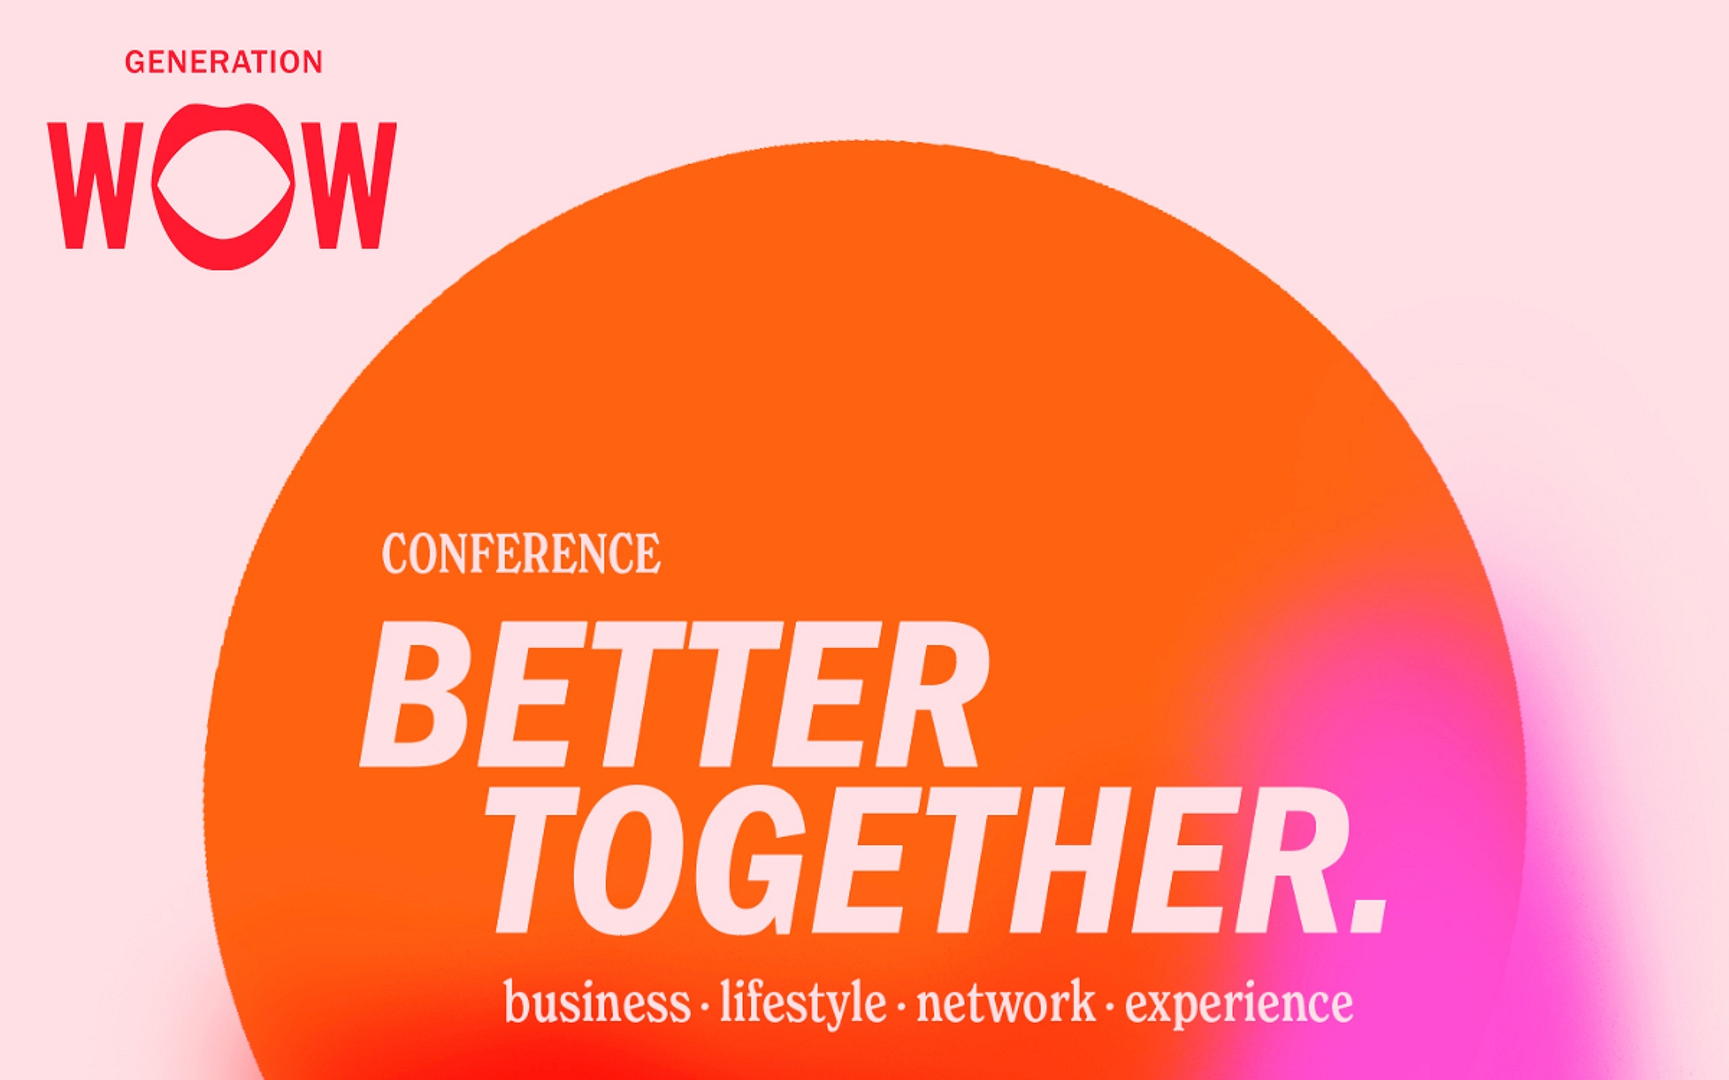 "Strengthening Bonds: Generation WOW & Bits of Love Unite to Launch Networking App at BETTER TOGETHER Conference"